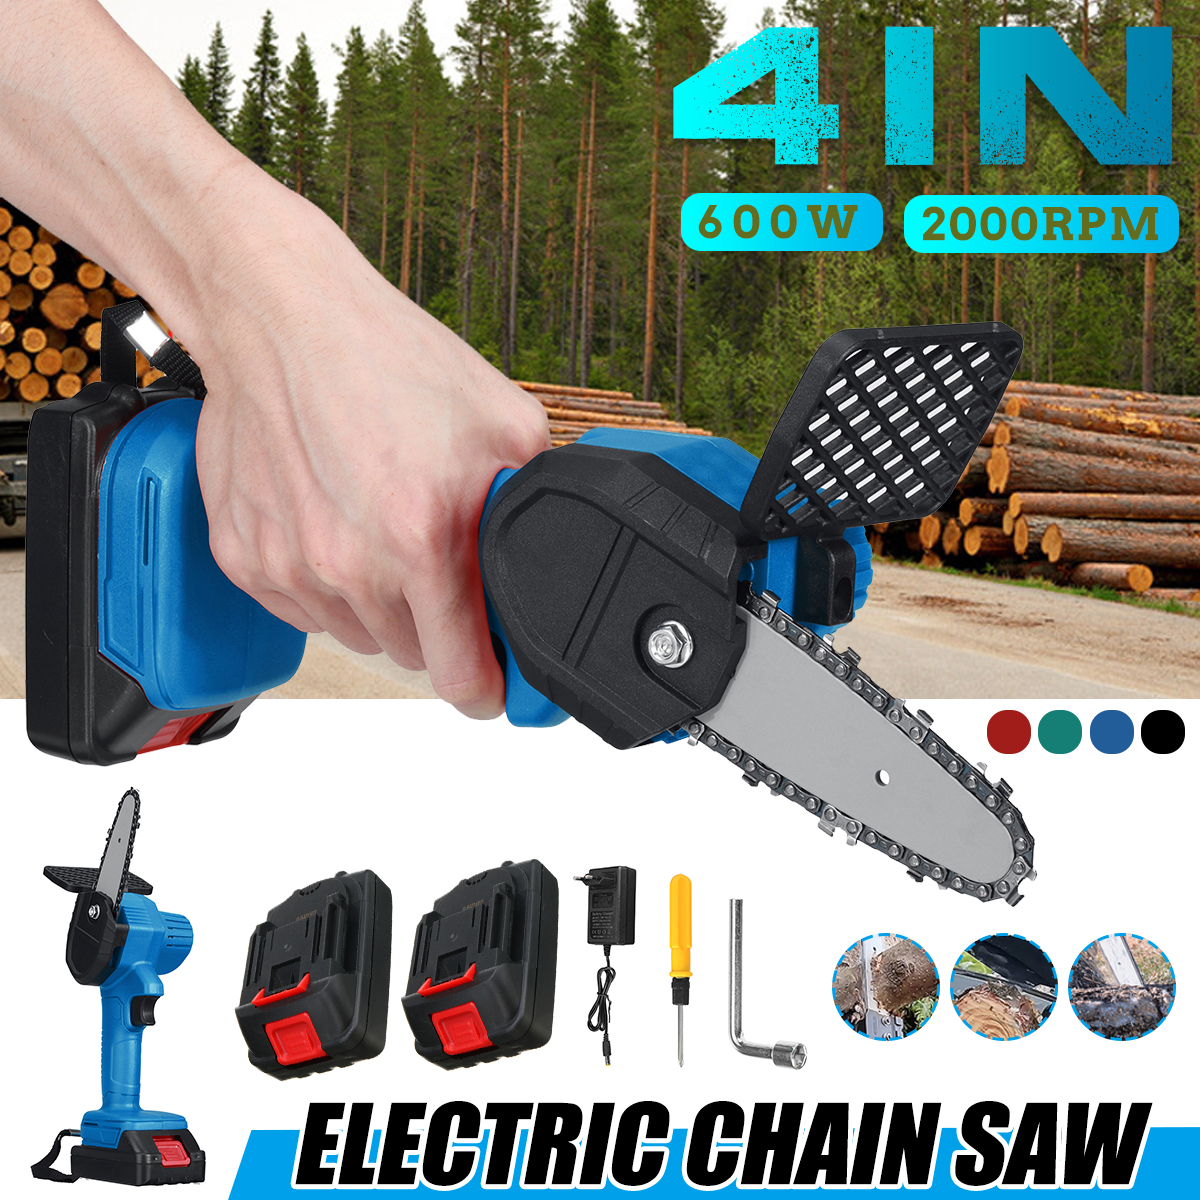 4-Inch-600W-88VF-Cordless-Electric-Chain-Saw-One-Hand-Cutter-Woodworking-ChainSaw-W-12-Battery-1874432-1